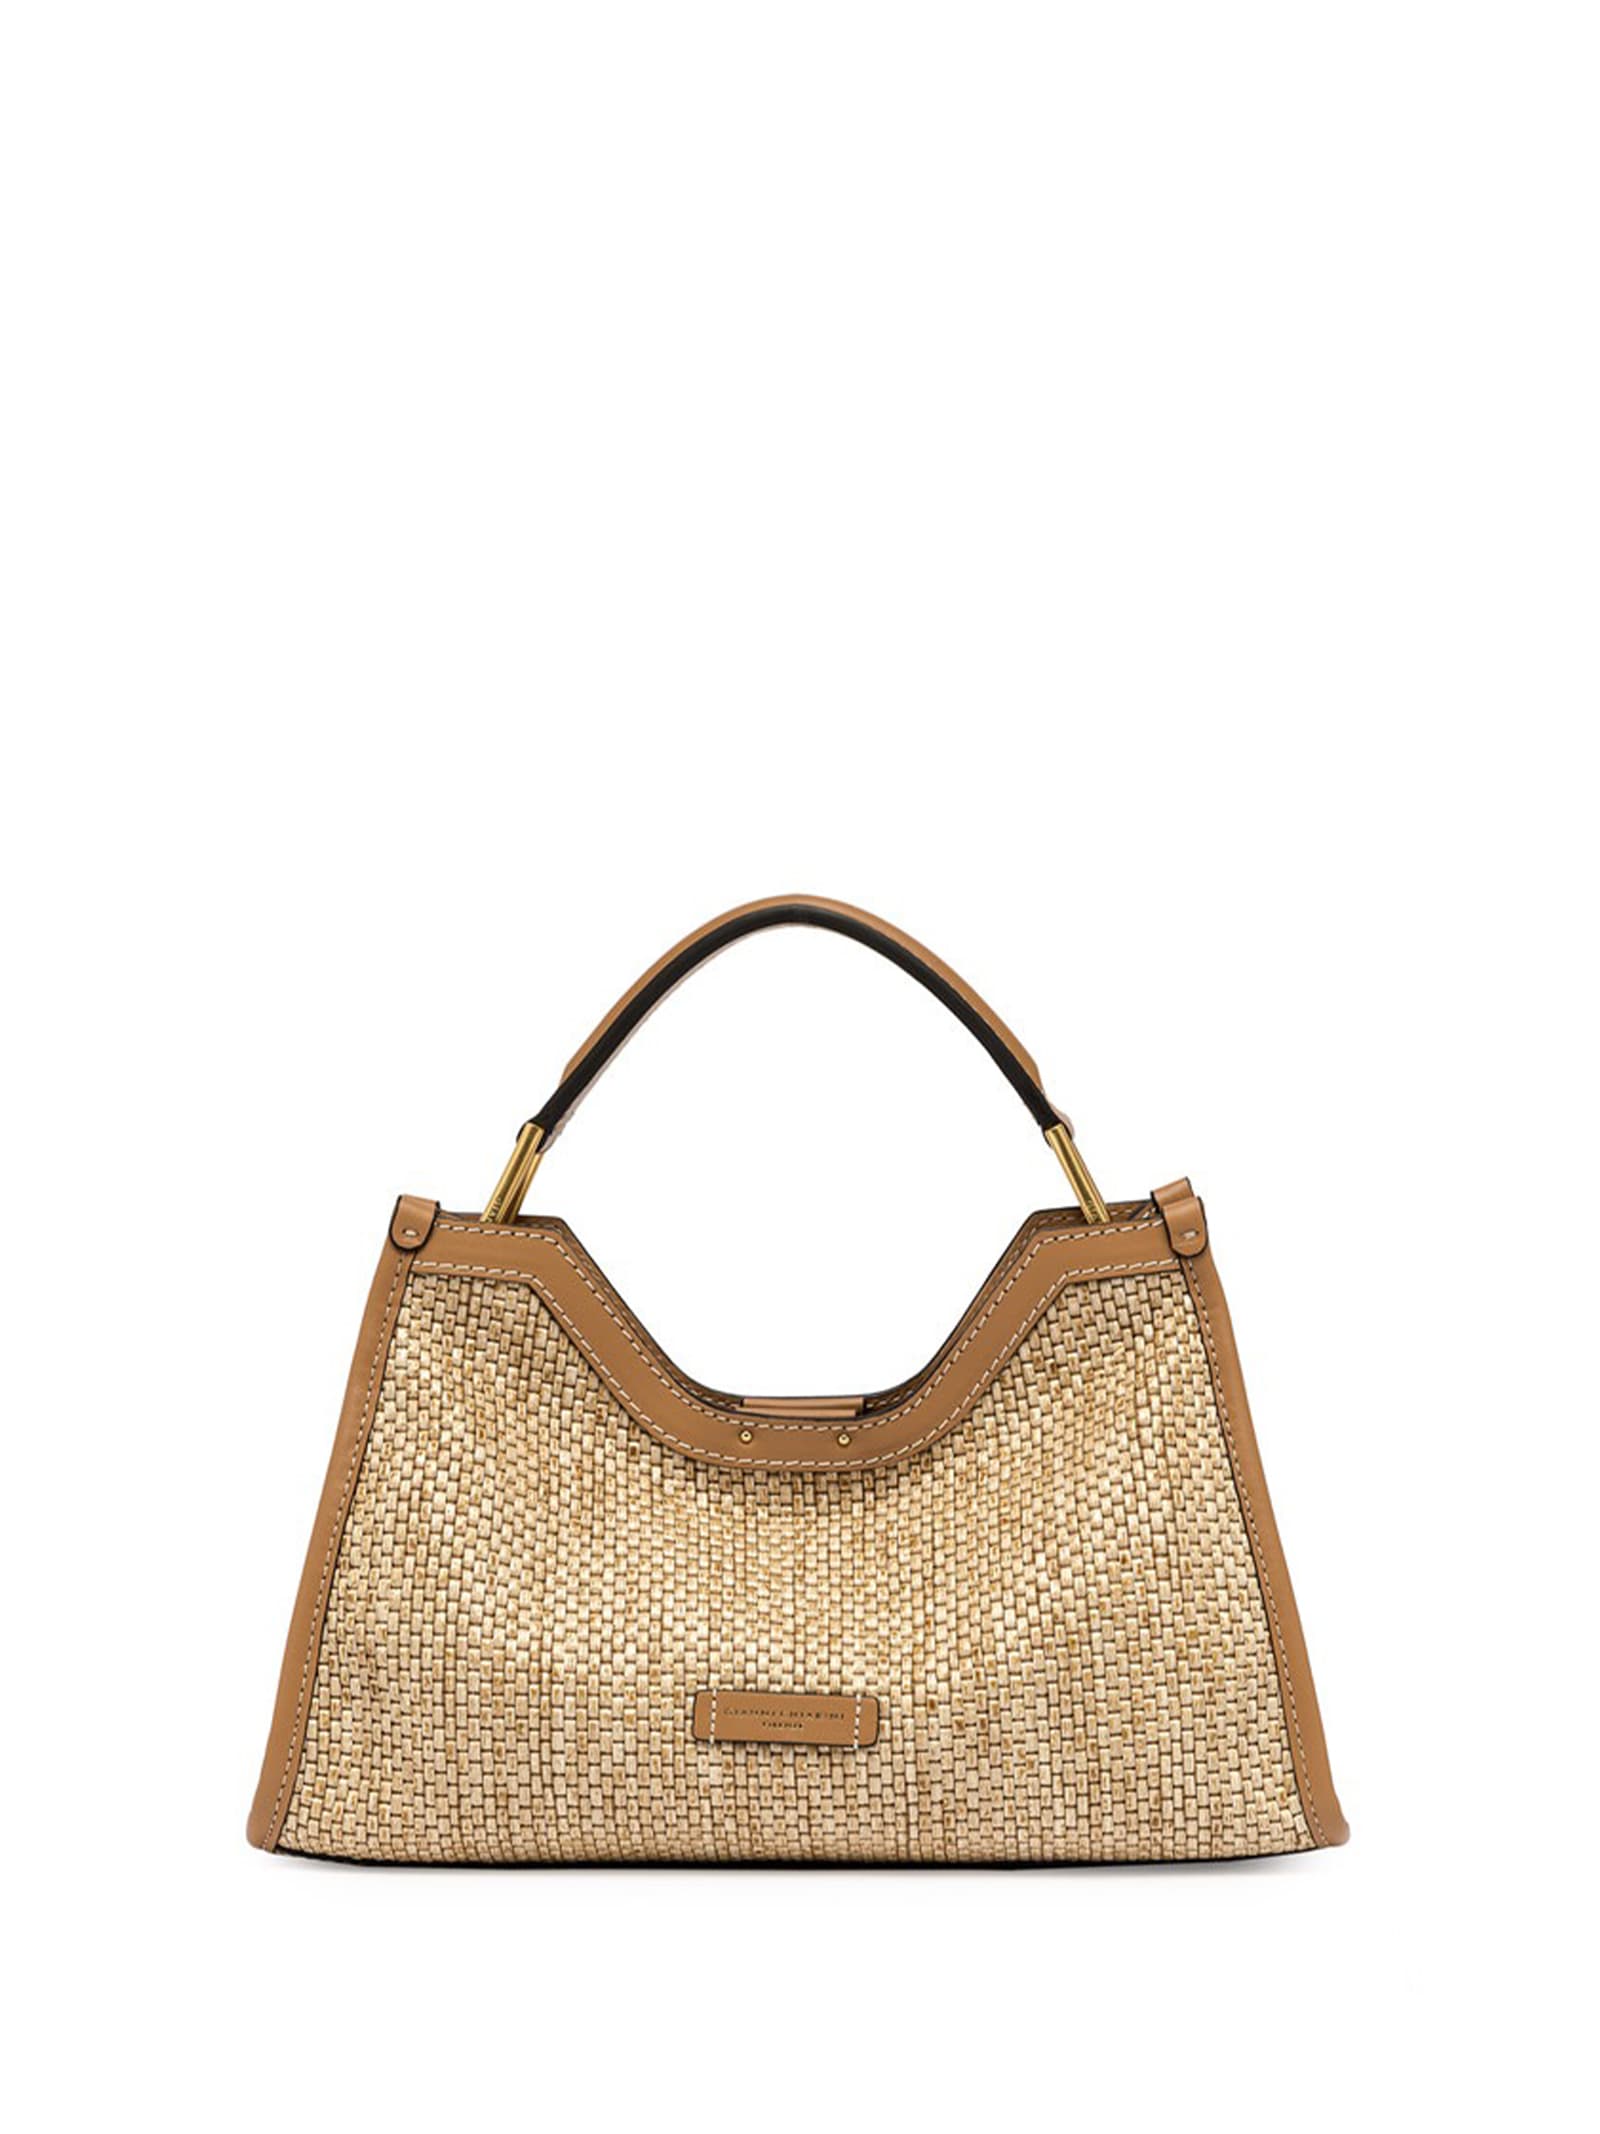 Aurora Bag In Woven Straw With Leather Profiles